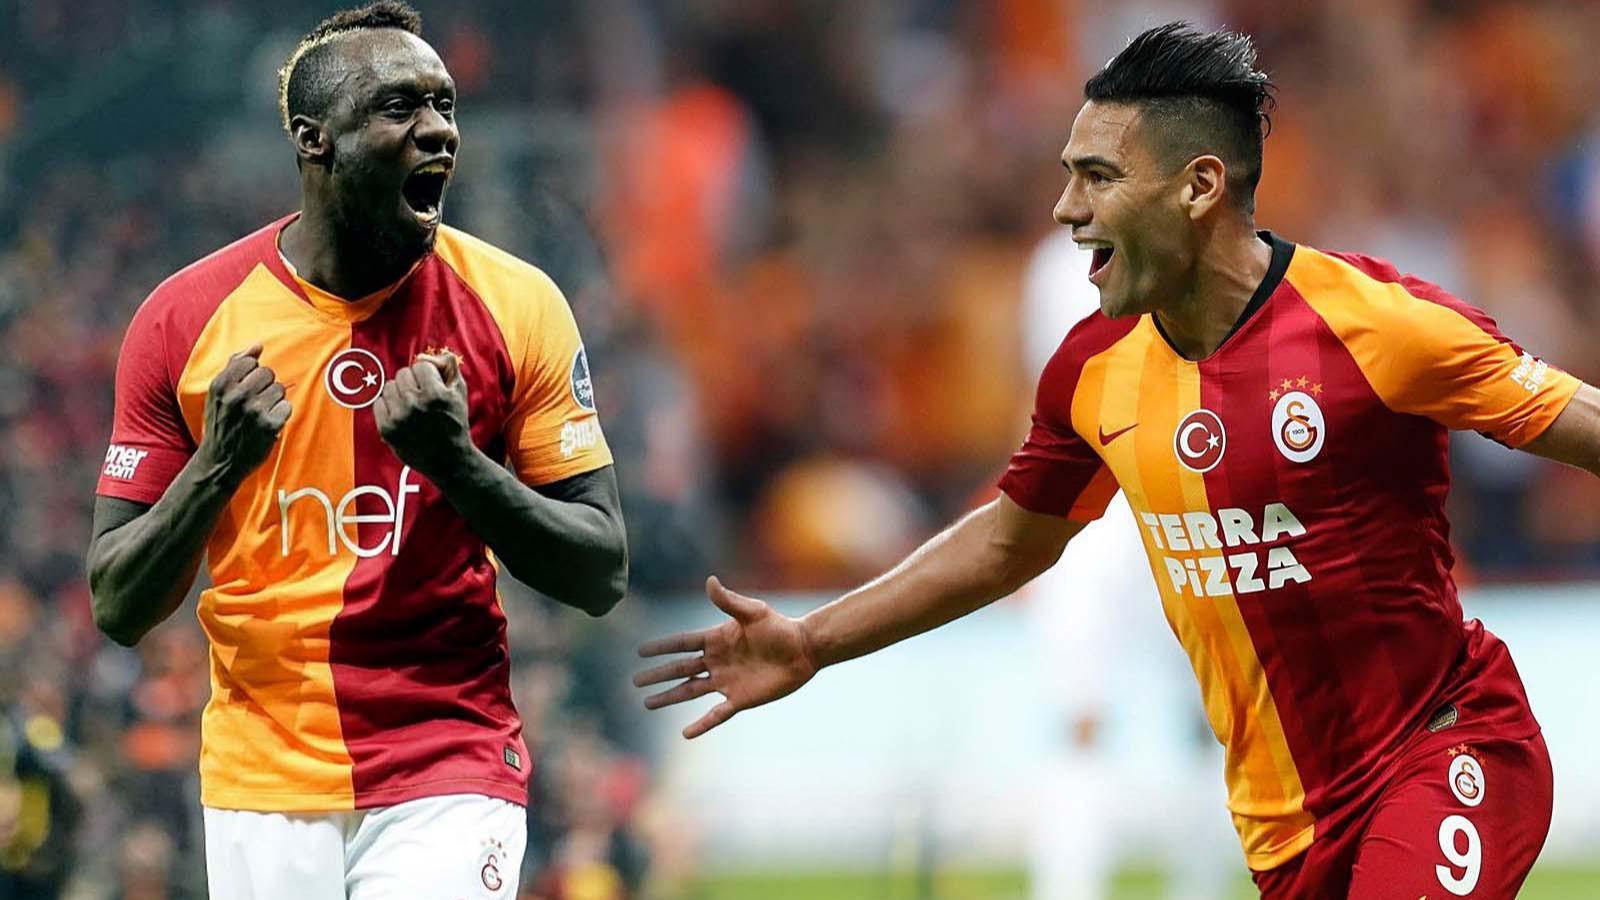 Galatasaray should play as if it were Falcao, not Diagne